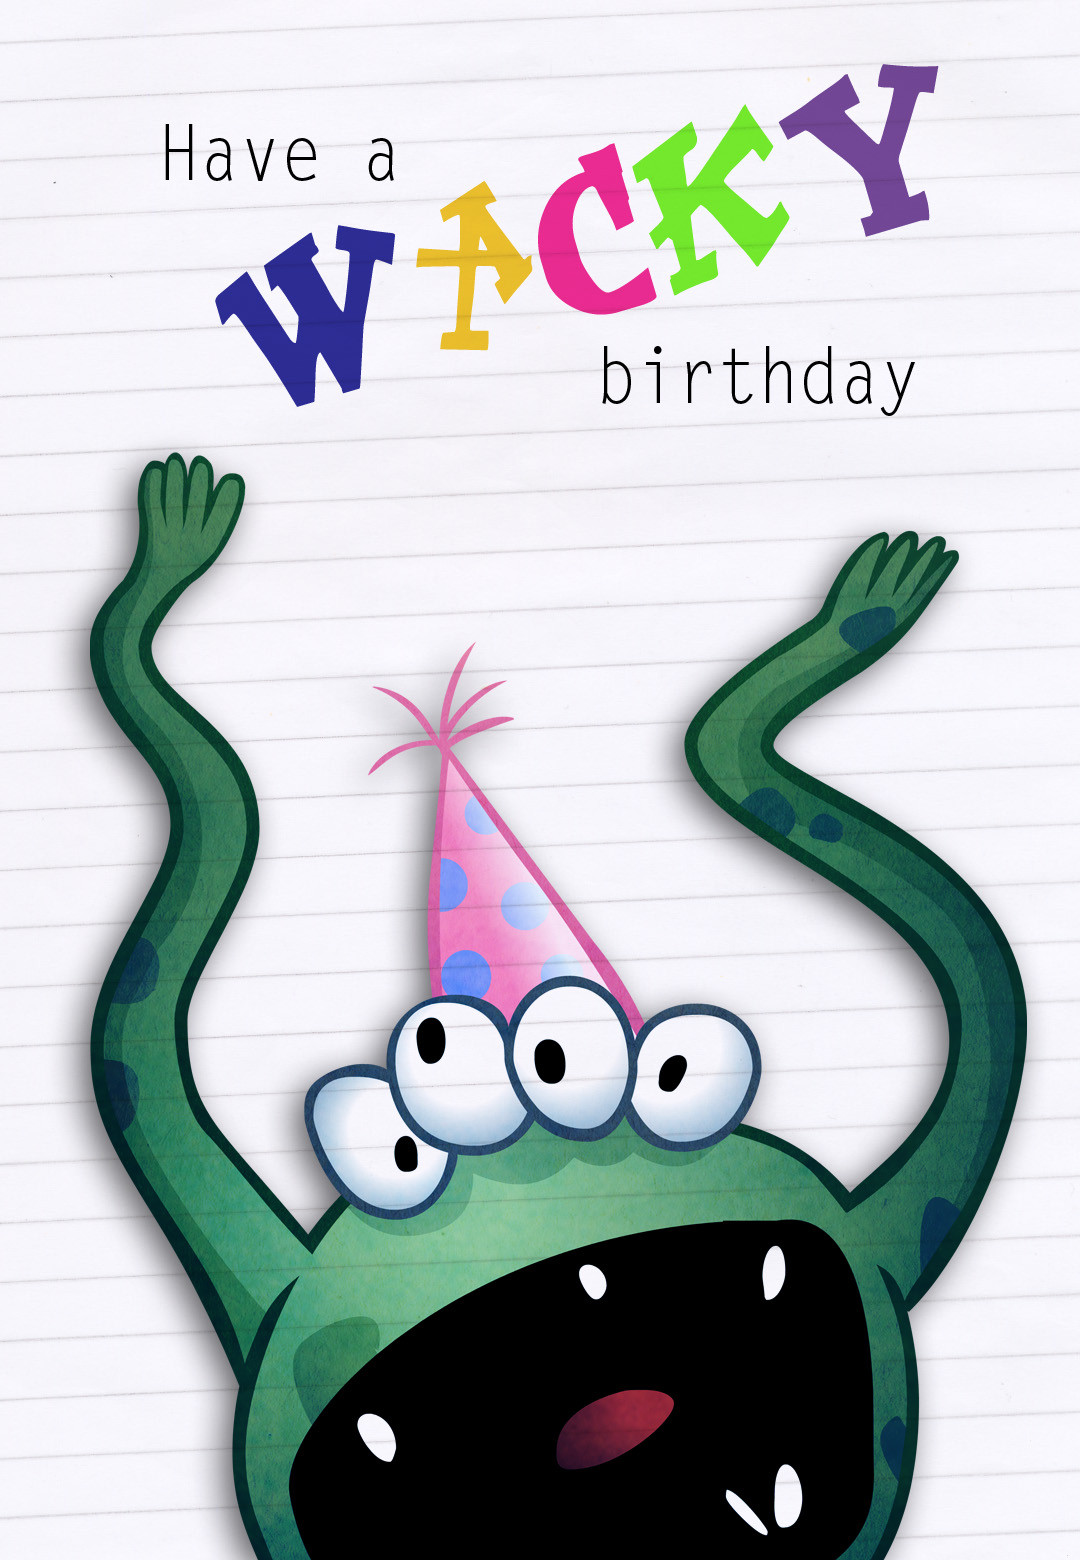 Free Printable Birthday Cards For Kids
 Funny Four Eyed Monster Birthday Card